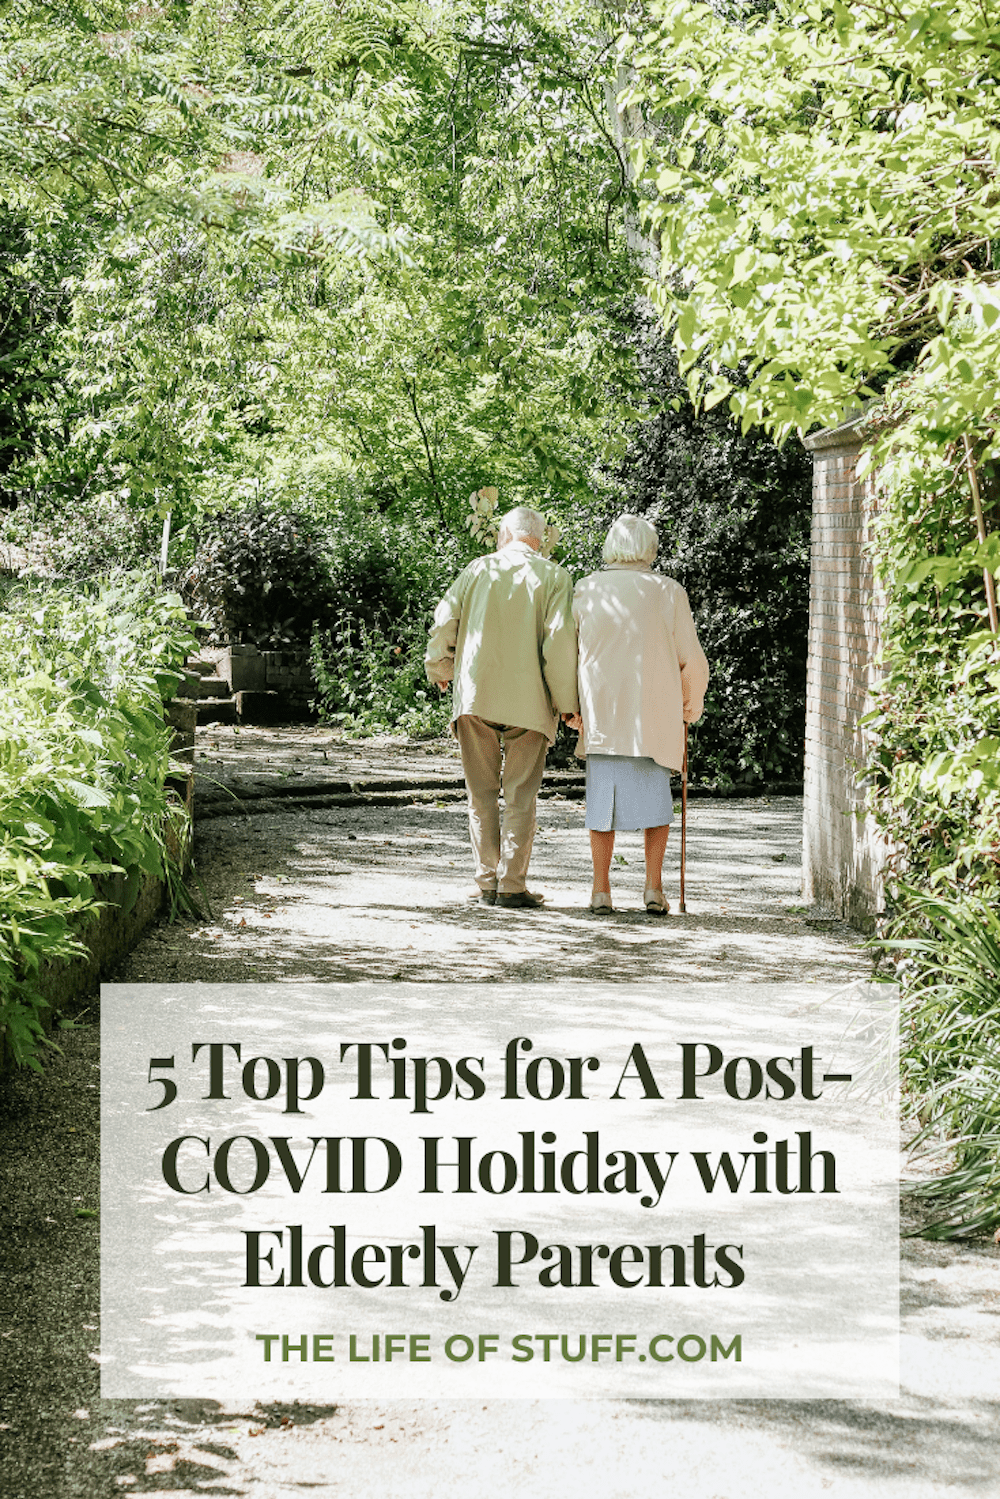 5 Top Tips for A Post-COVID Holiday with Elderly Parents - The Life of Stuff